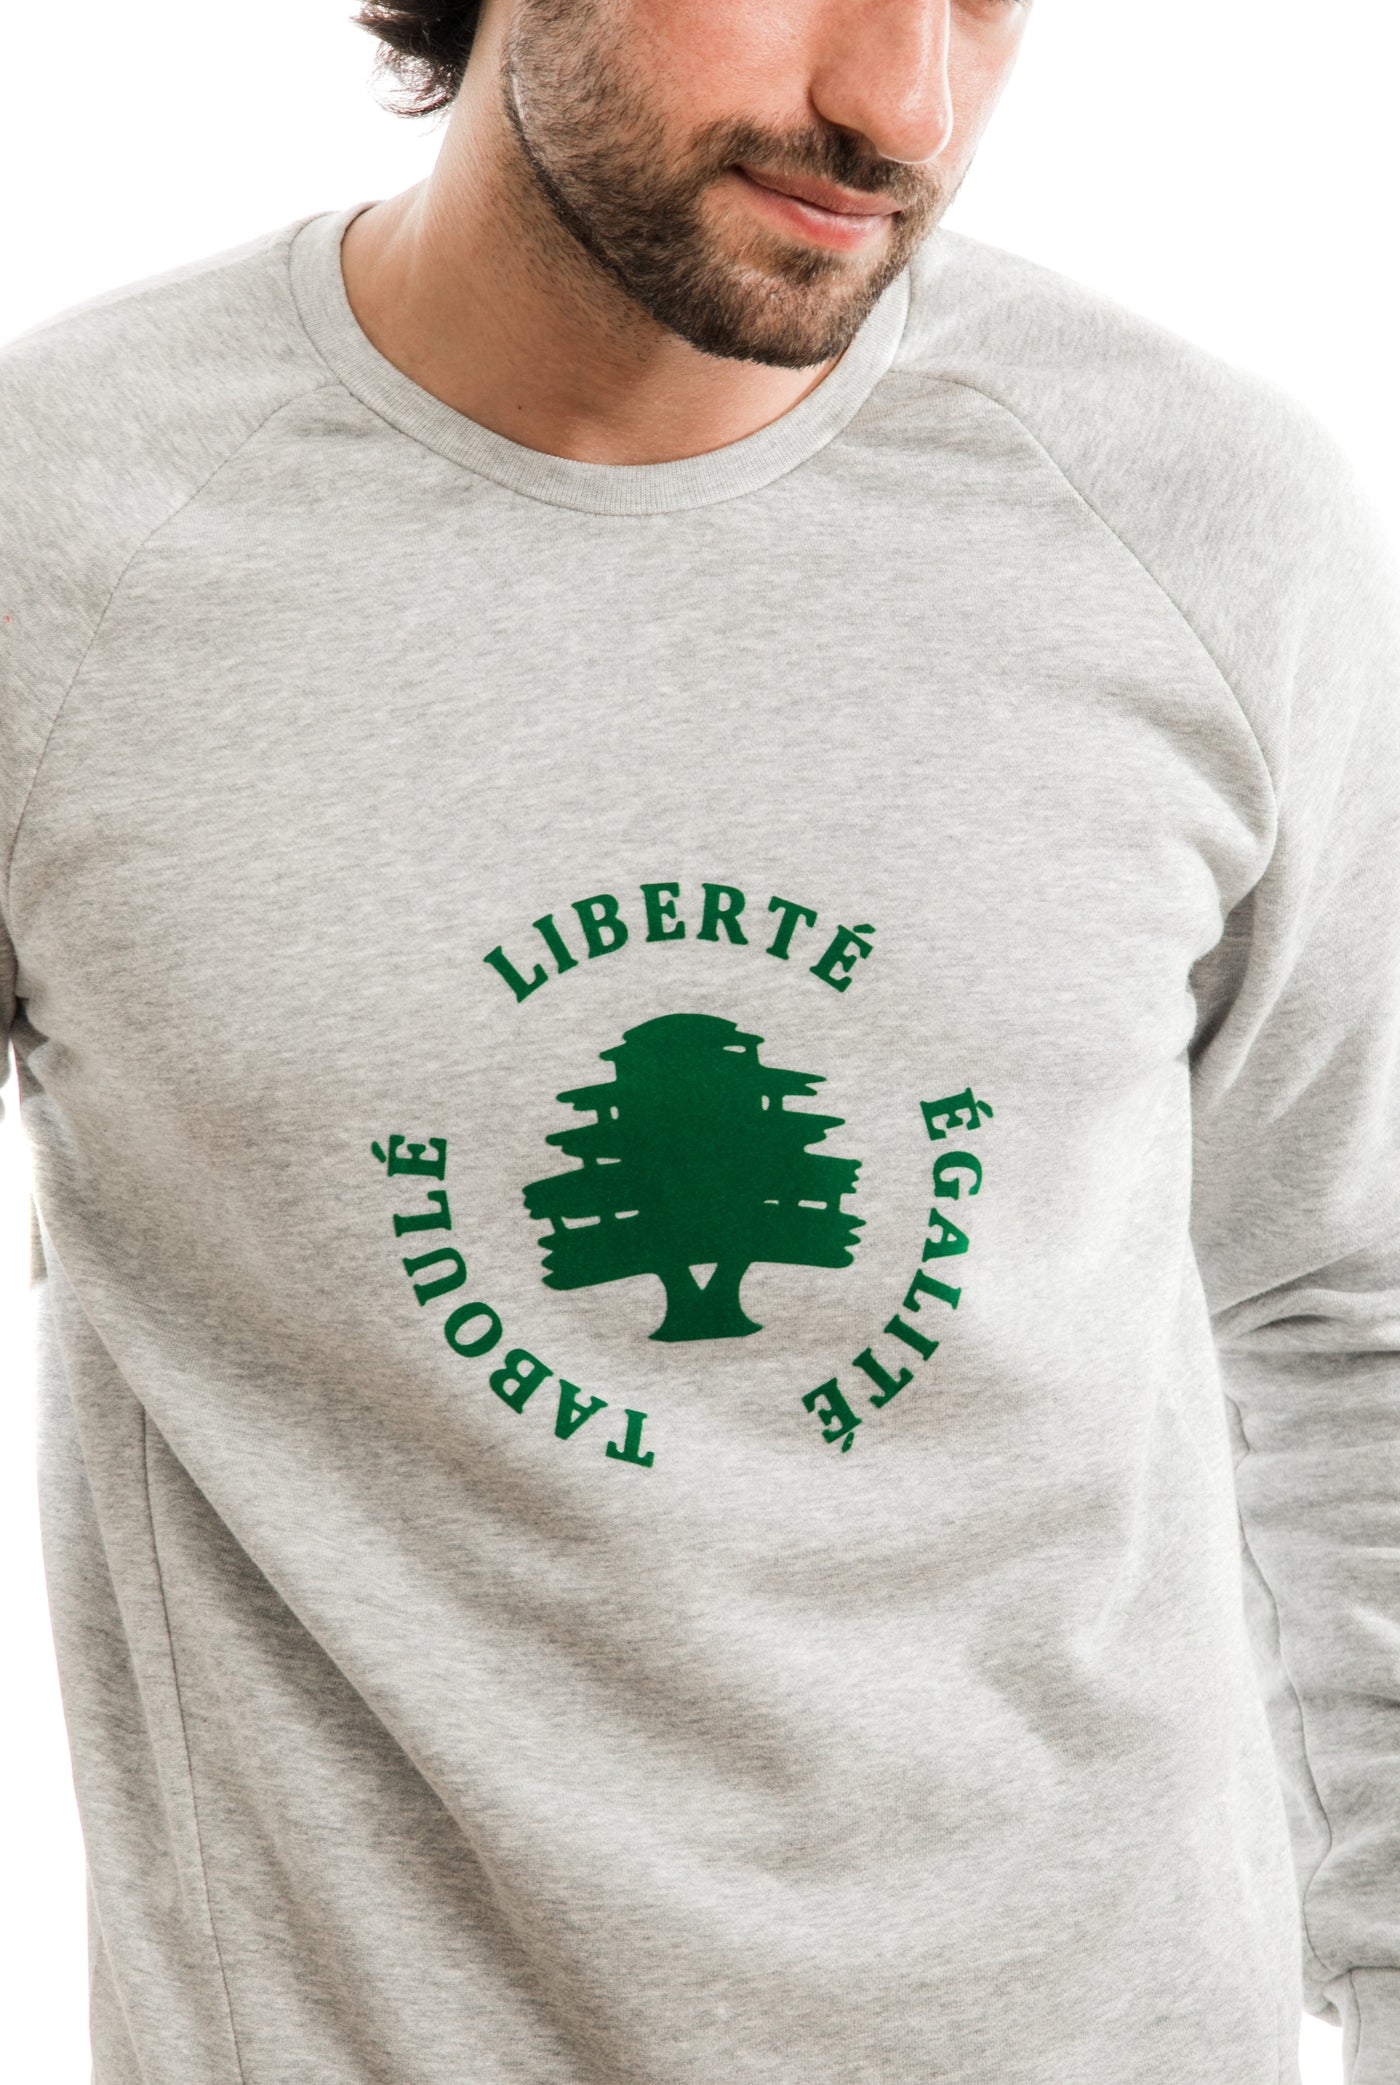 young adult male wearing grey sweater with liberté égalité taboulé written in french and in green in the center of the sweater